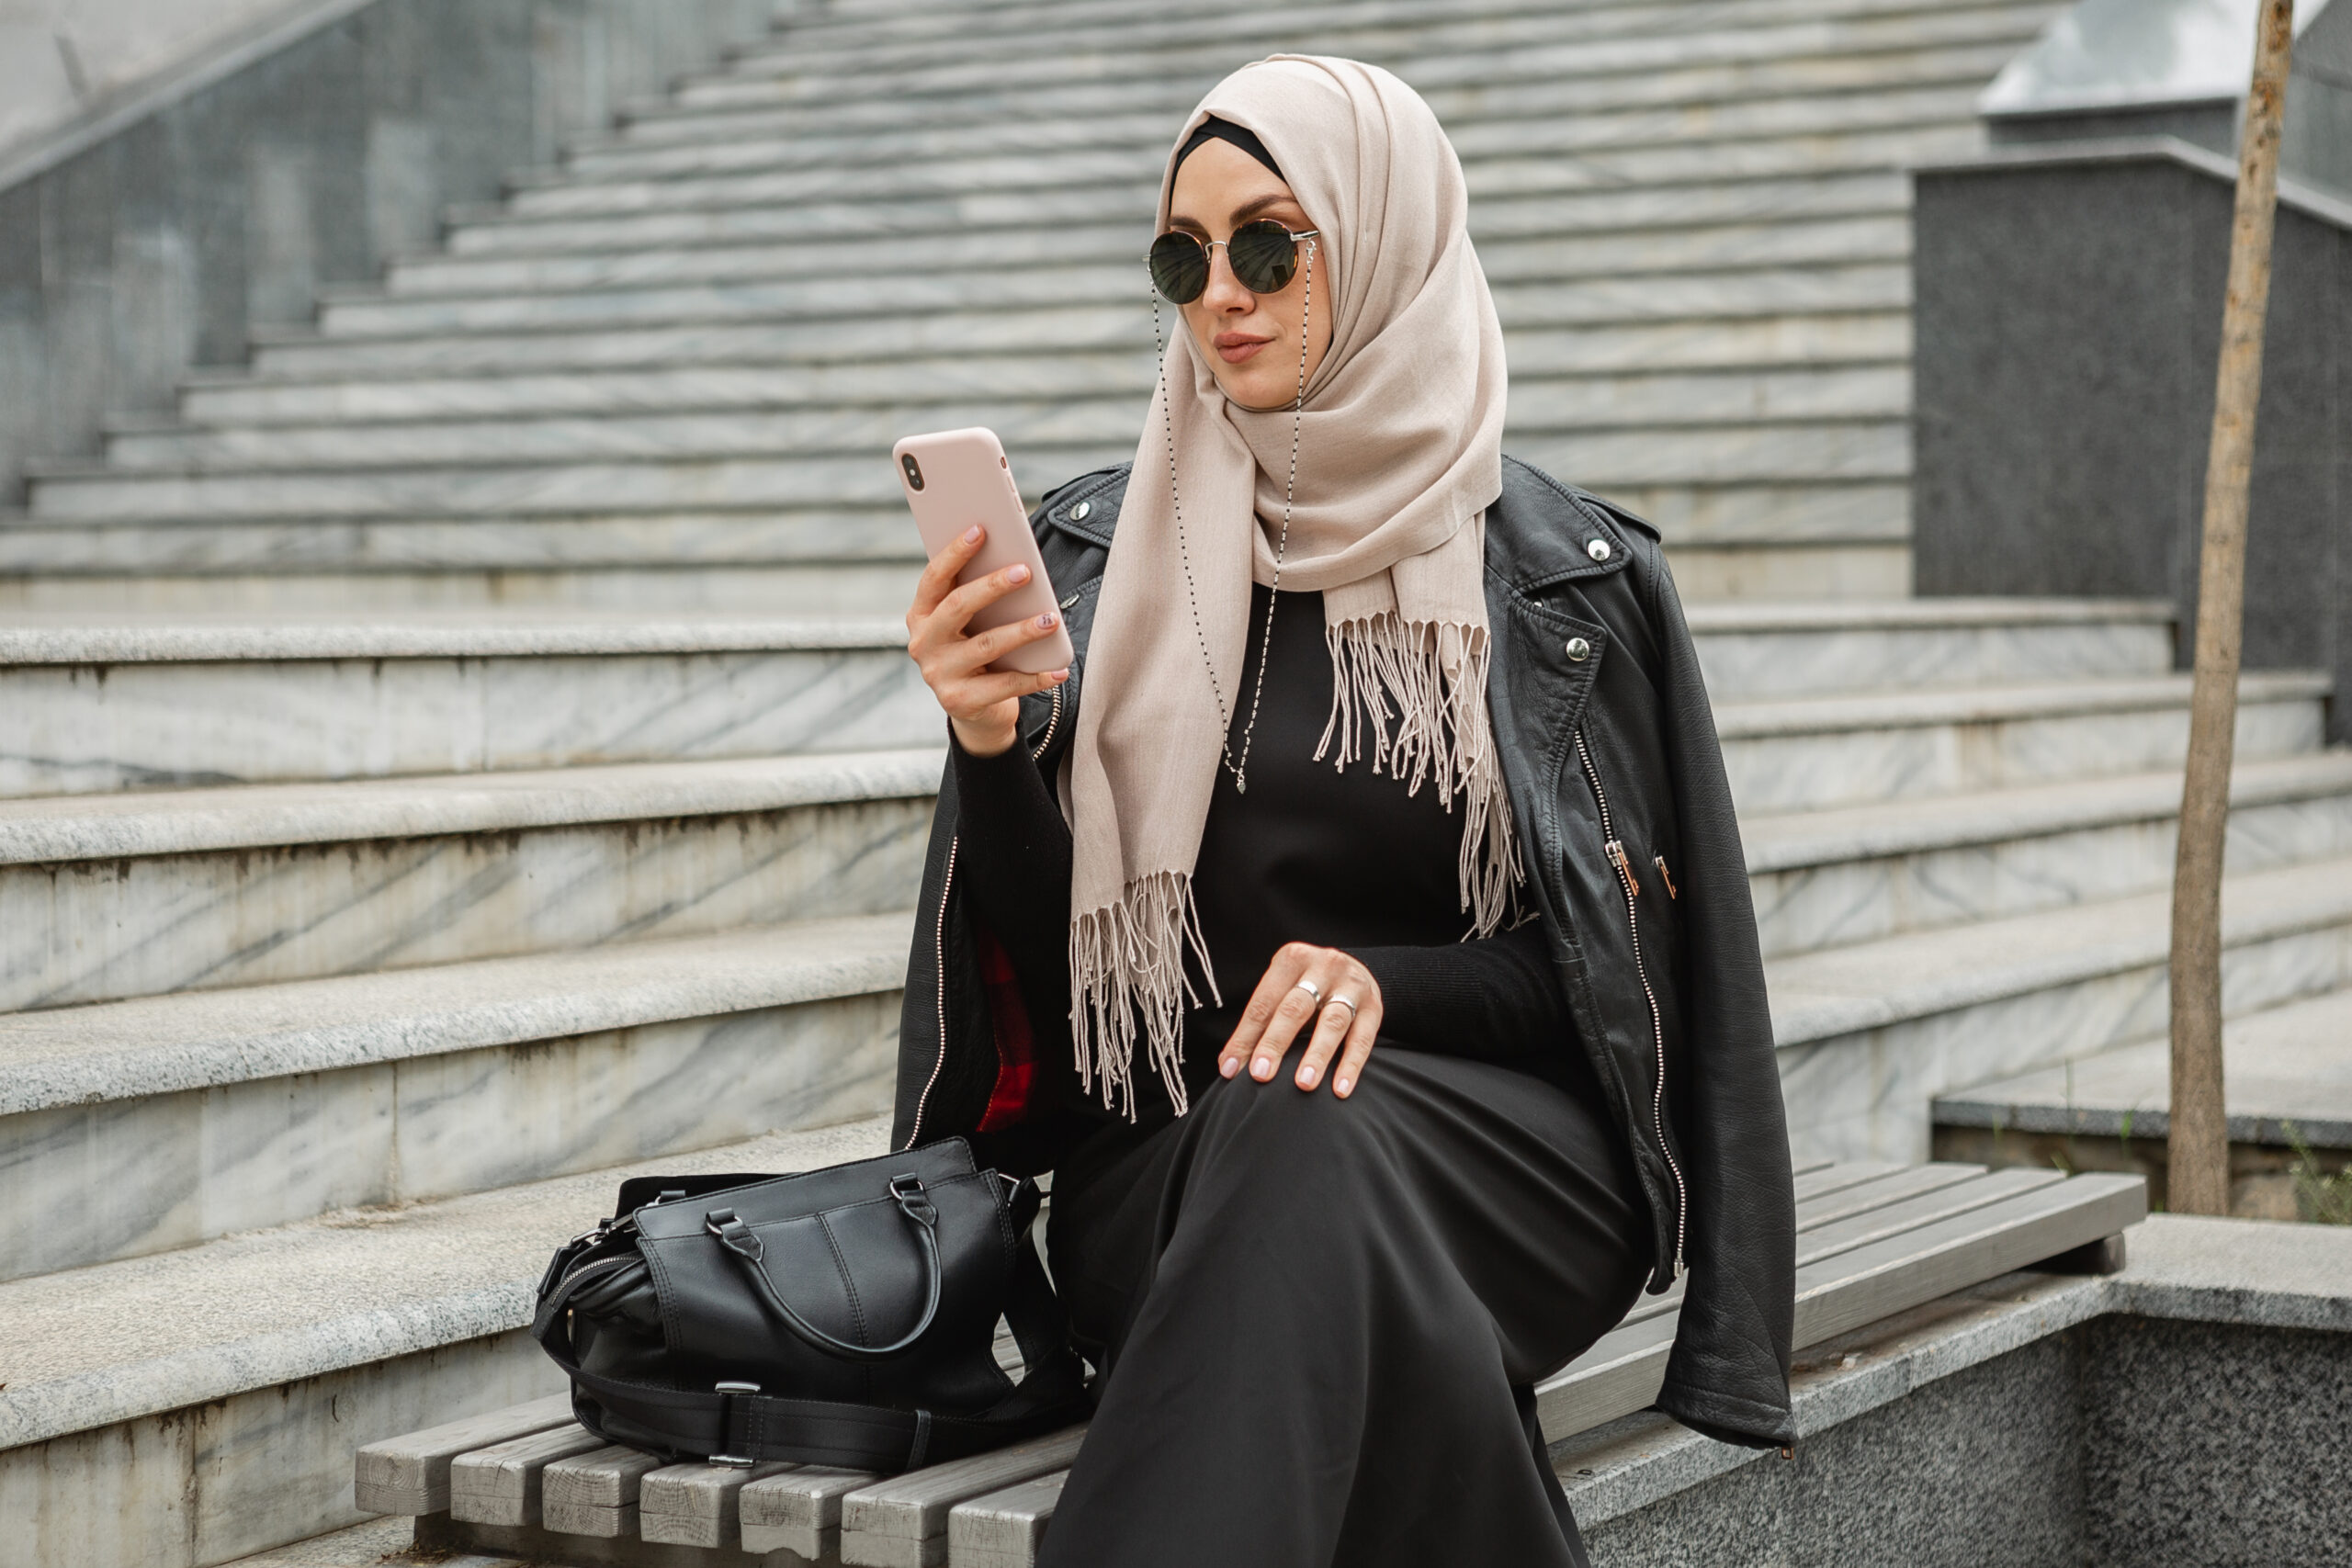 modern stylish muslim woman in hijab, leather jacket and black abaya walking in city street using smartphone, wearing sunglasses and bag, fashion style trend